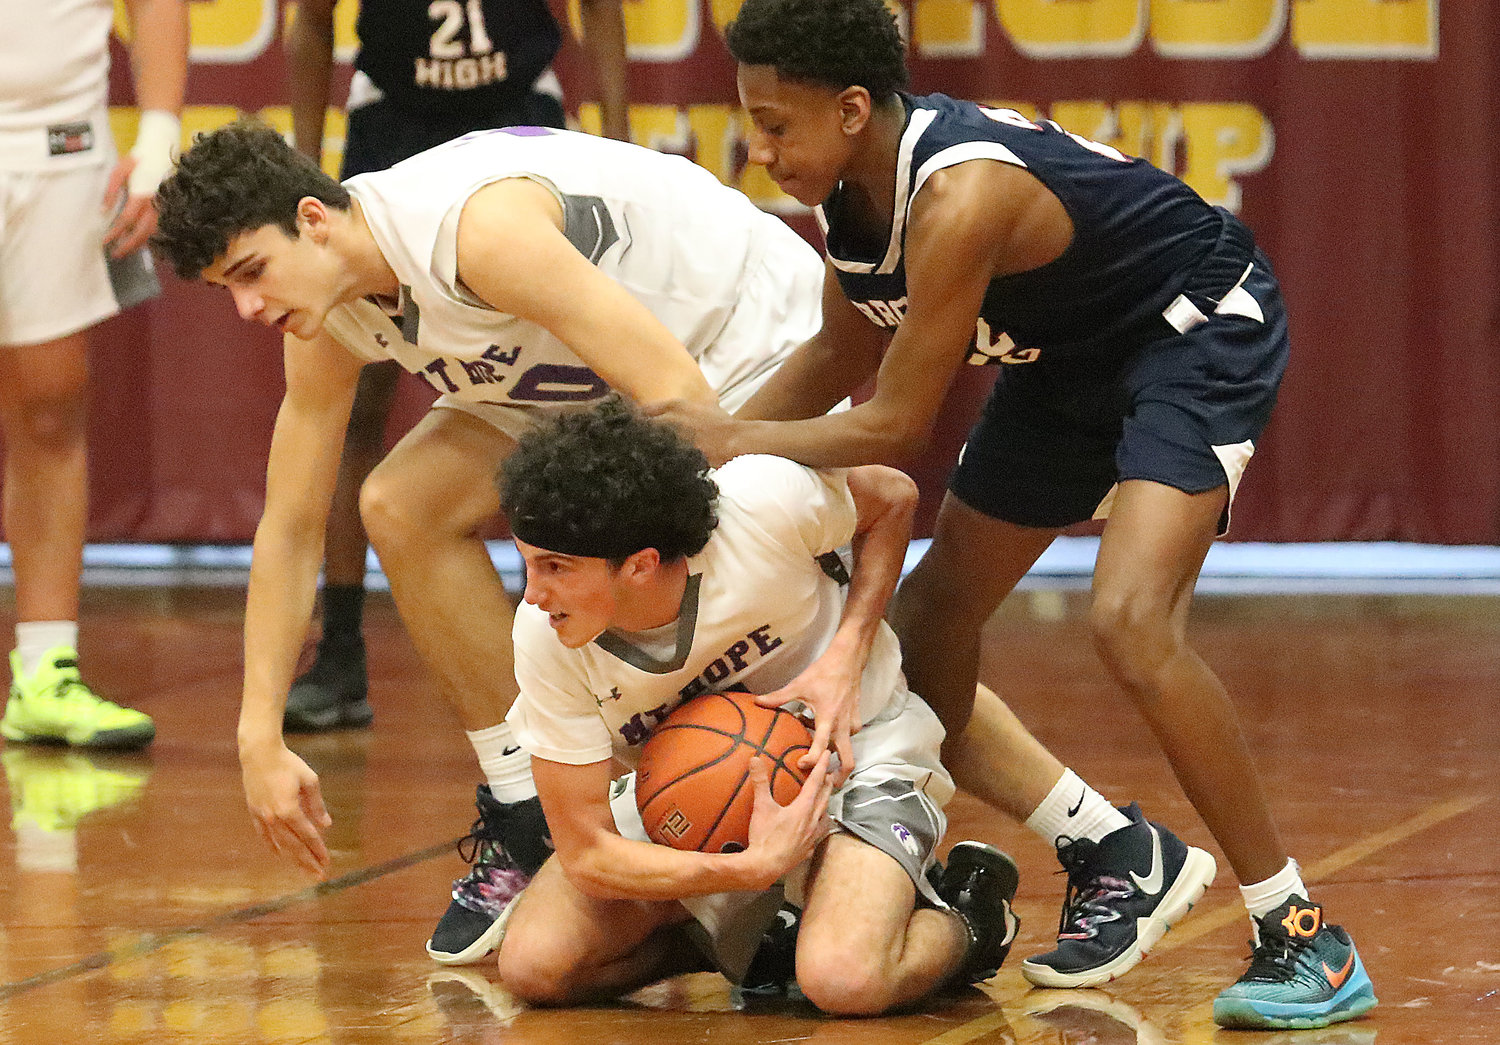 Brady Thibaudeau (left) catches himself from falling onto teammate Nuno Ponte-Amaral (center) as he collects a loose ball.